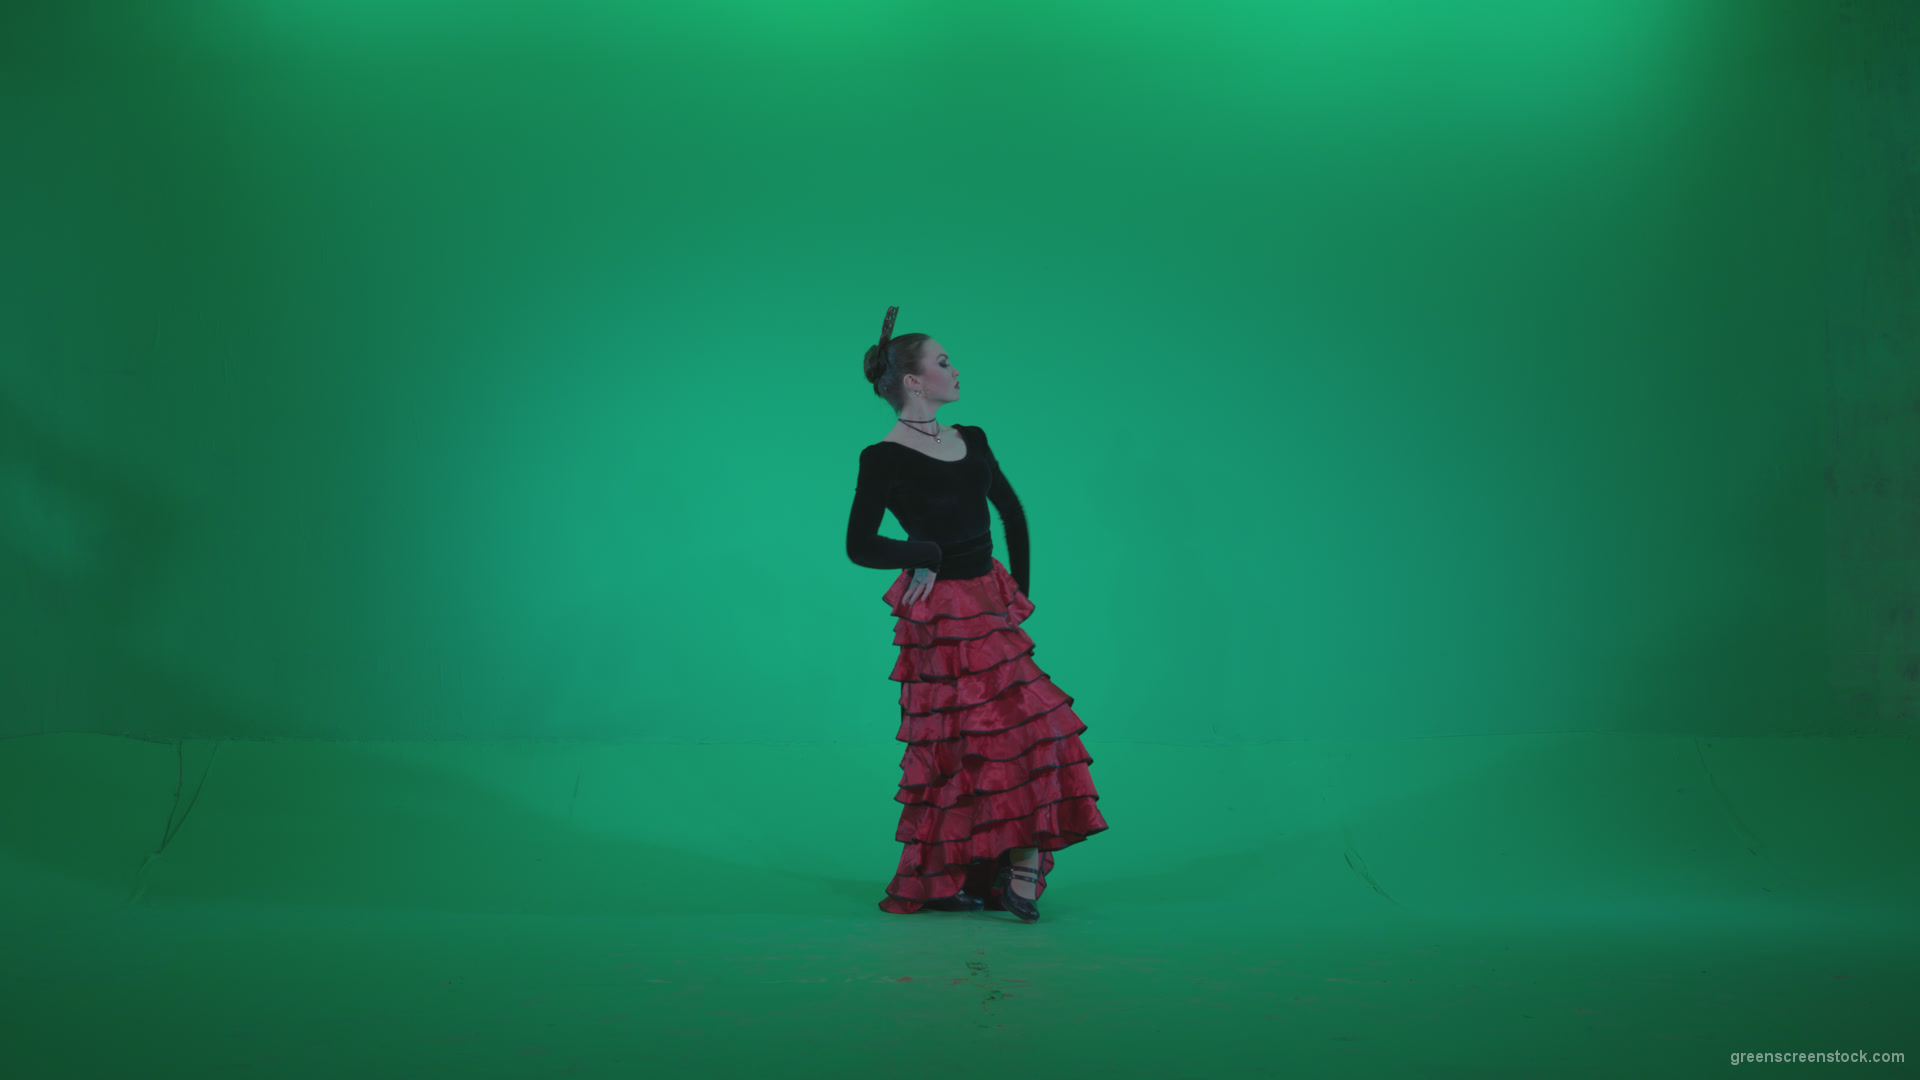 Flamenco-Red-and-Black-Dress-rb6-Green-Screen-Video-Footage_001 Green Screen Stock